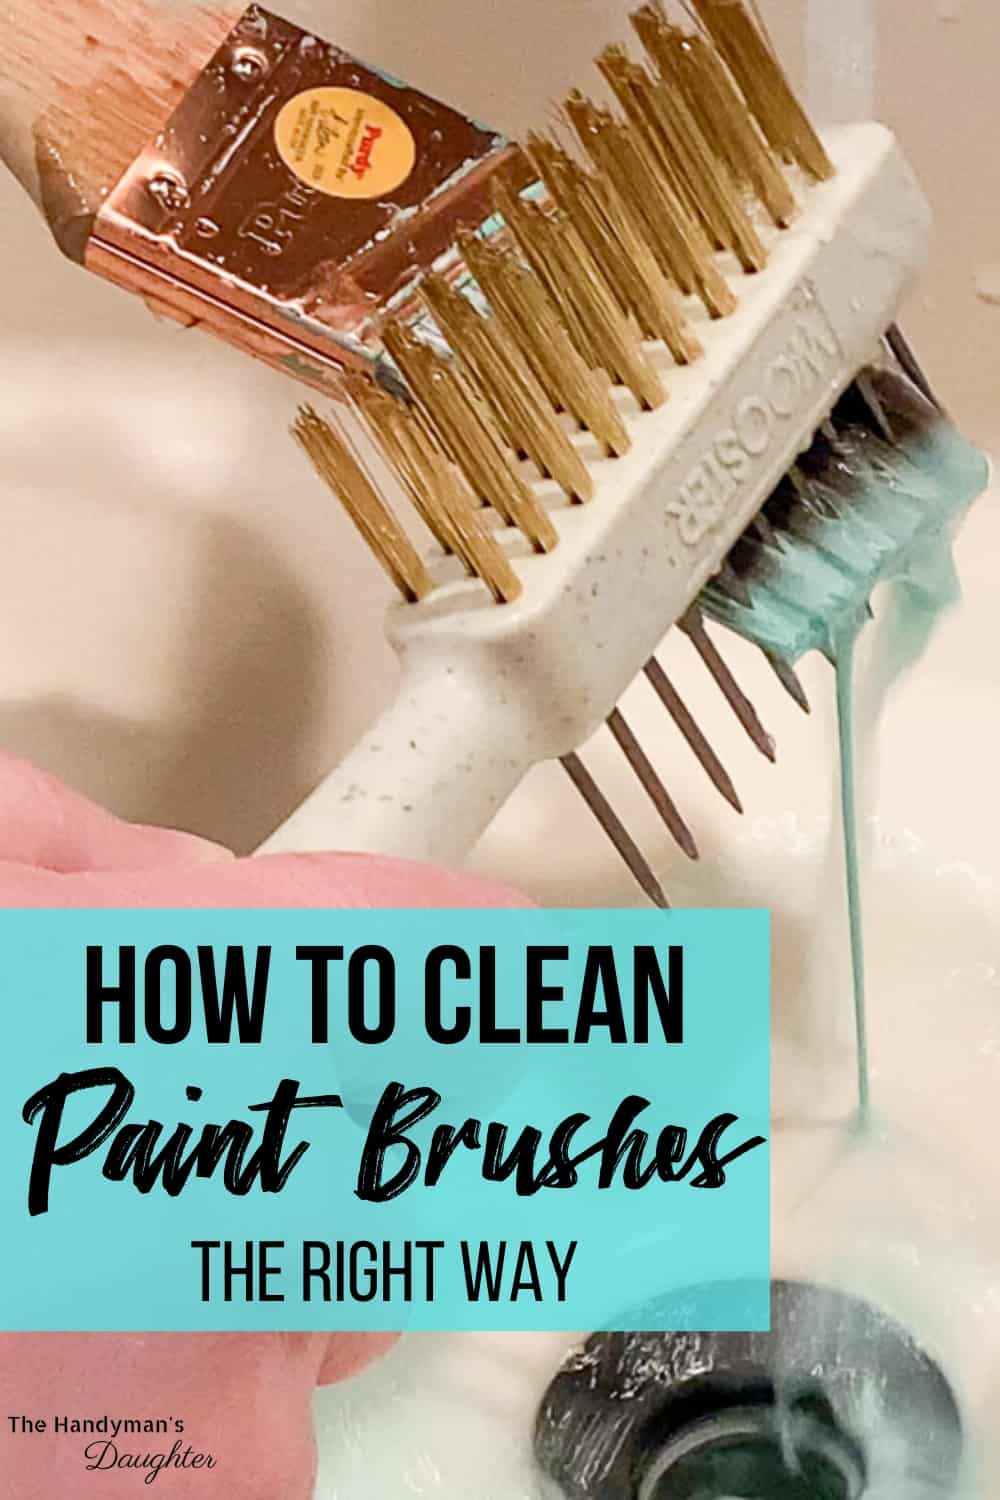 How Brushdoctor cleans your paintbrushes 